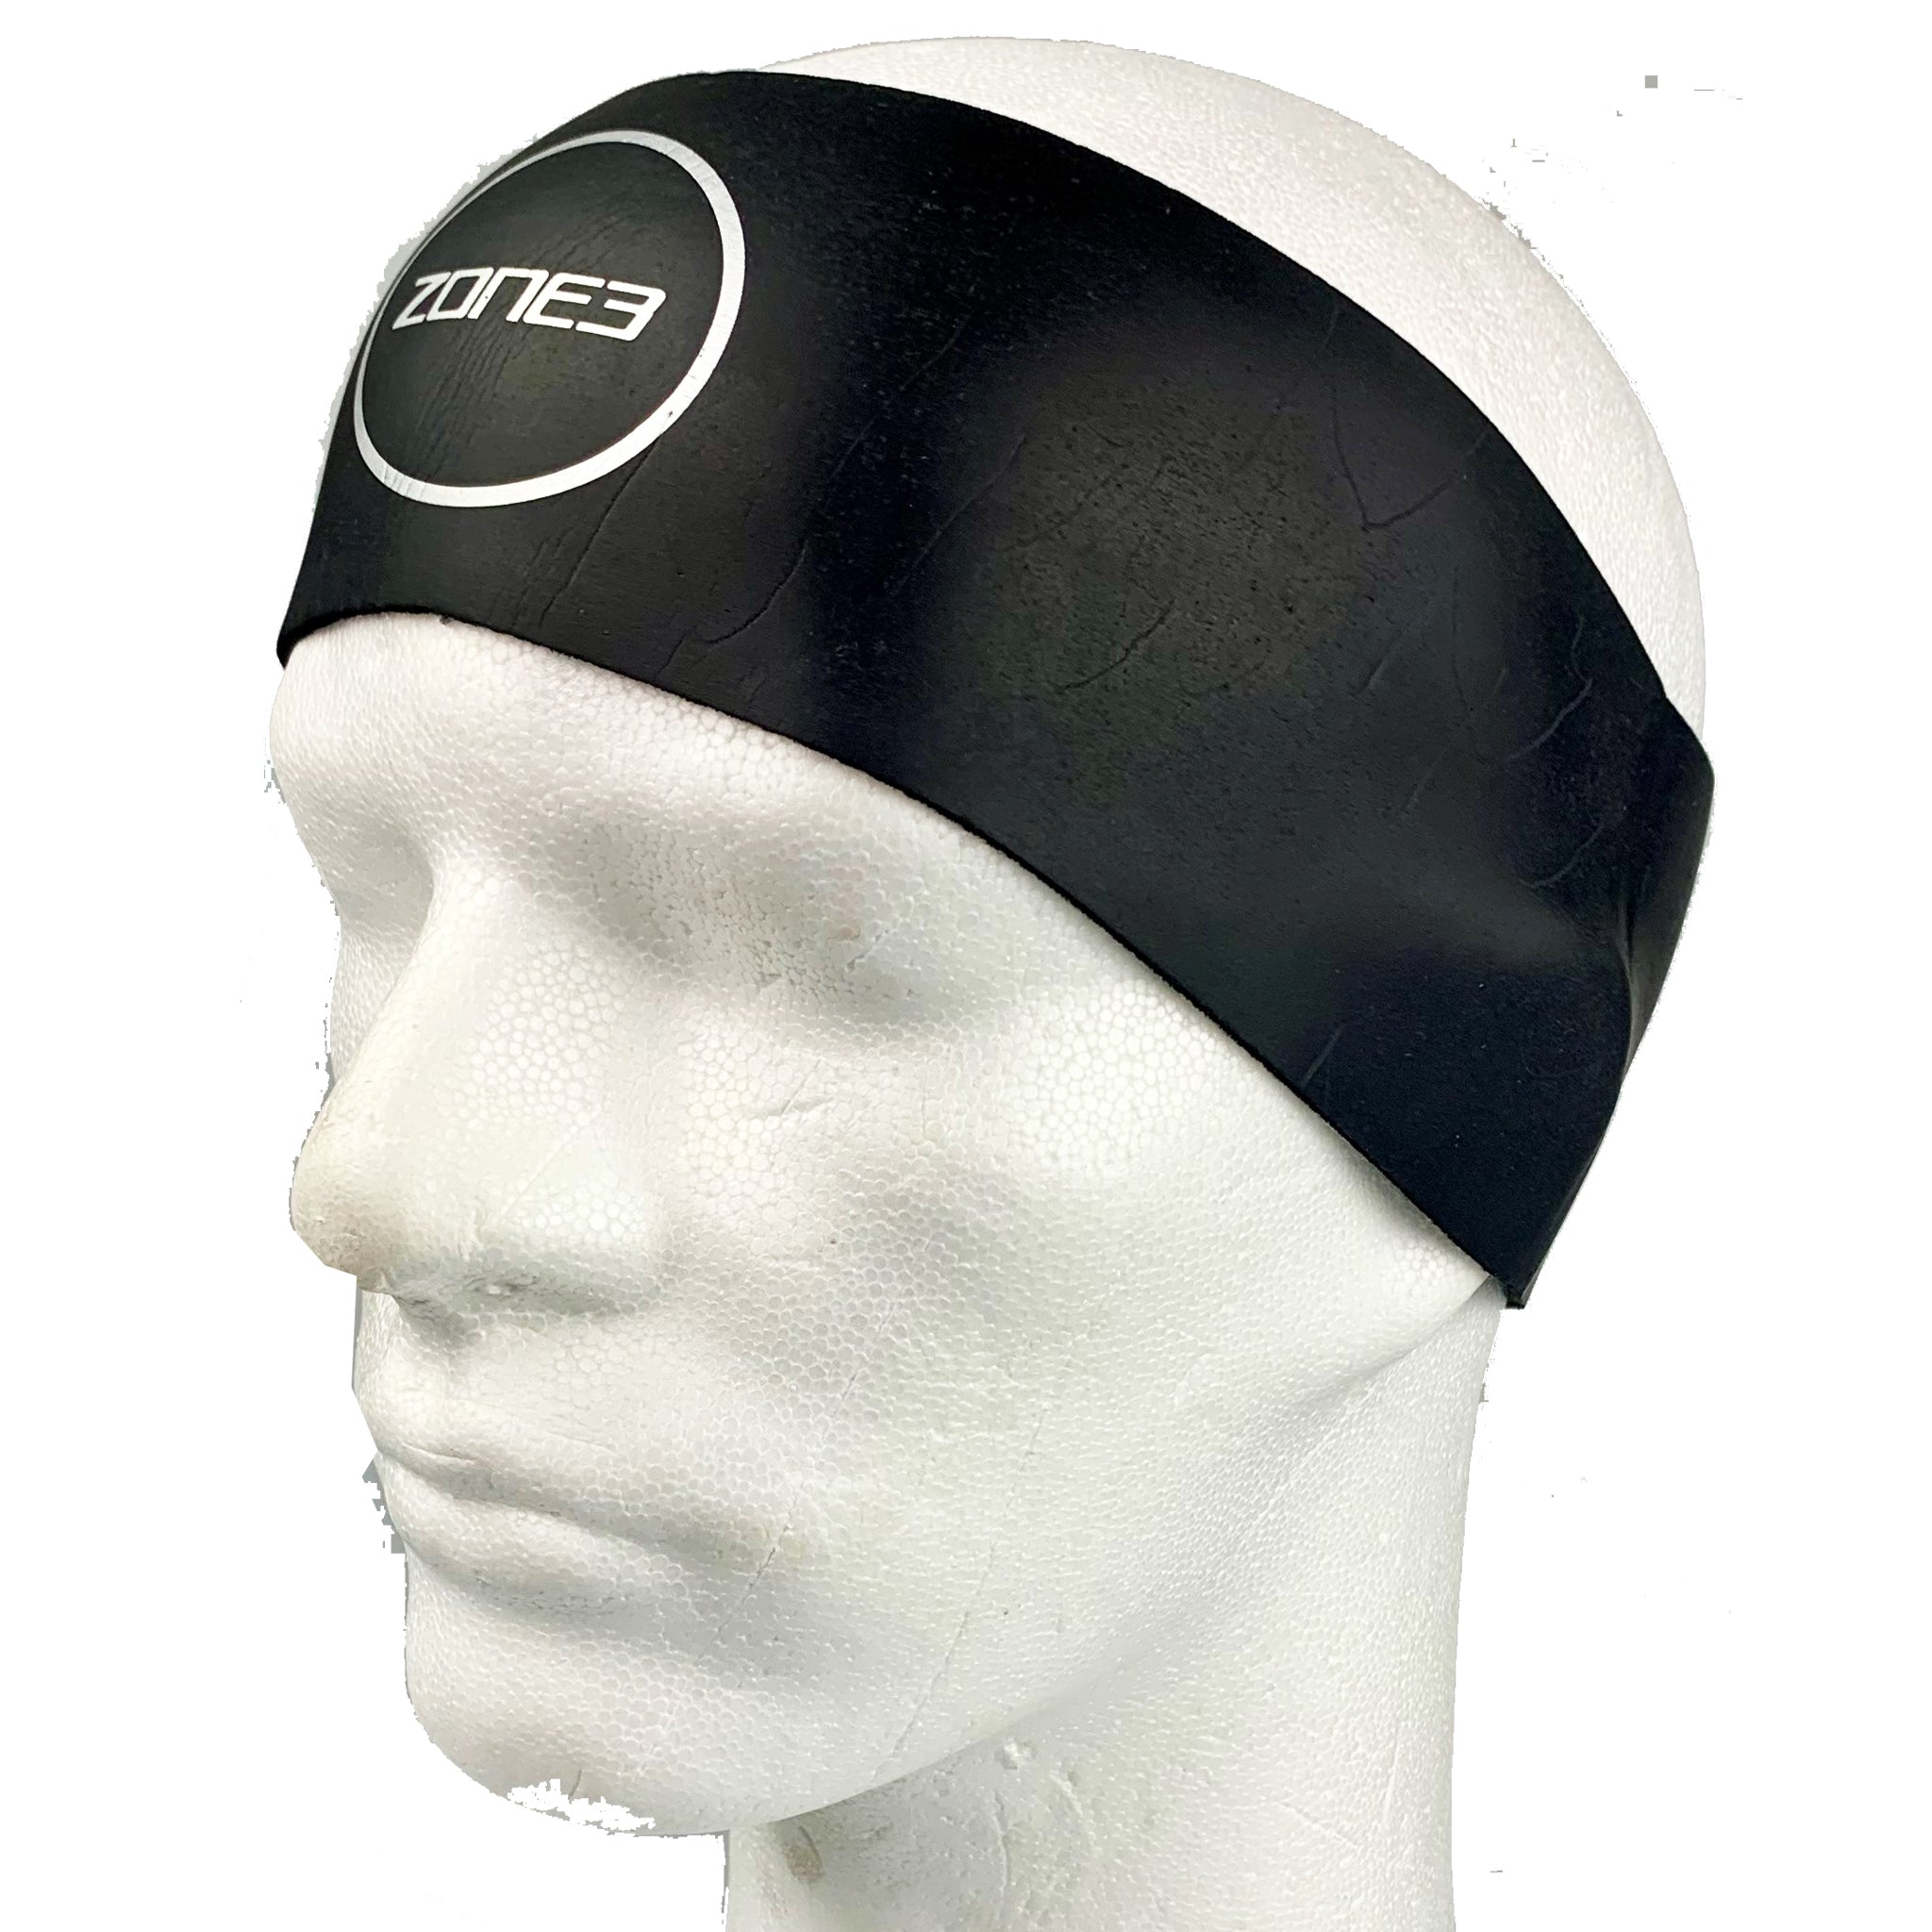 Zone3 Neoprene Swimming Headband | How it fits with ear coverage